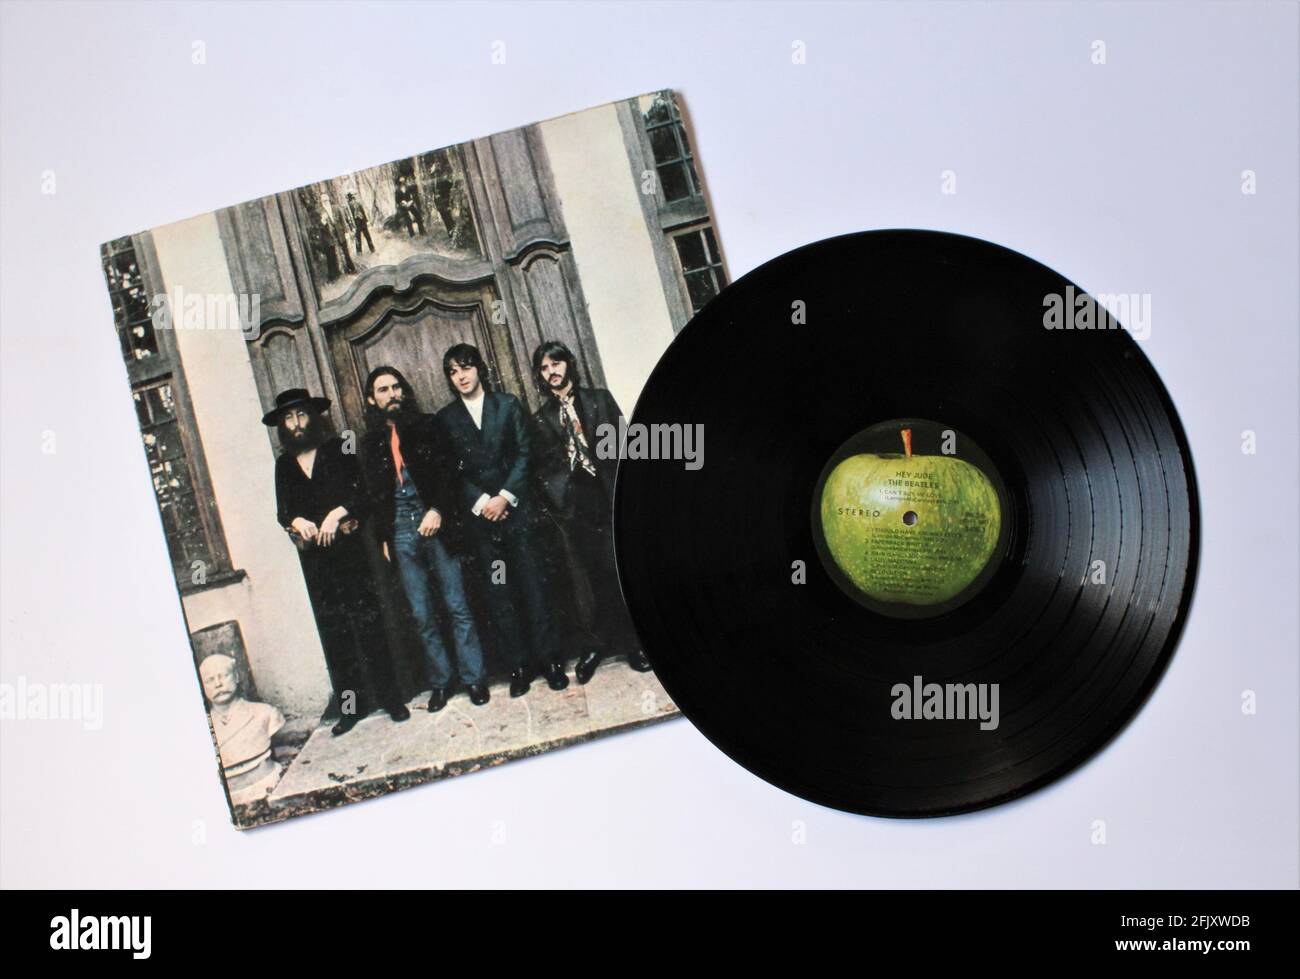 English rock band The Beatles music album on vinyl record LP disc. Titled: Hey Jude Stock Photo